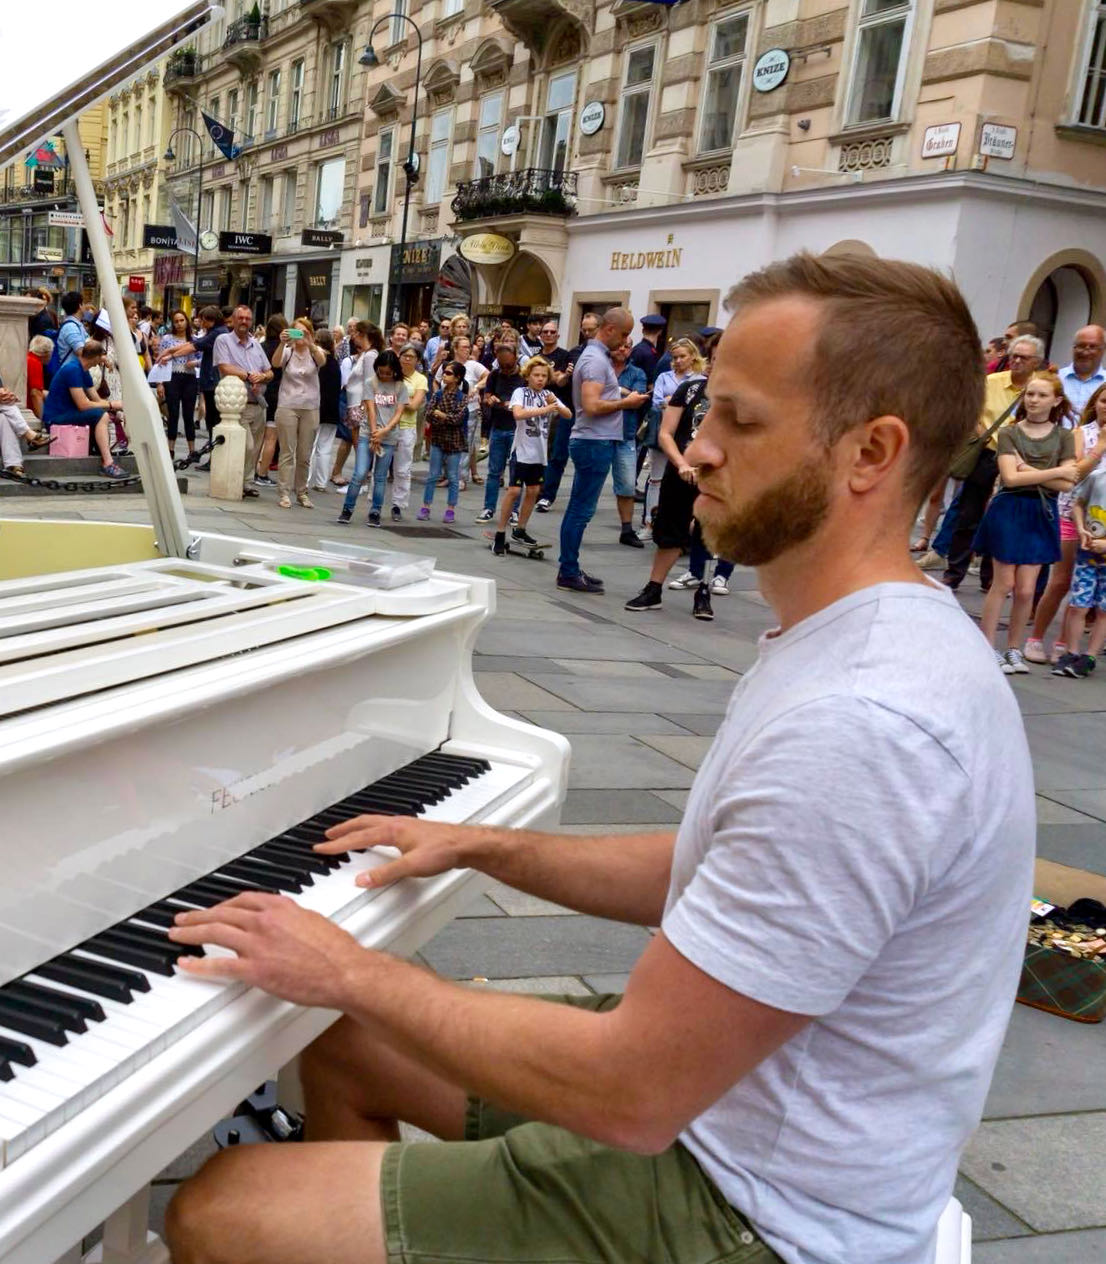 Picture in Vienna playing the piano